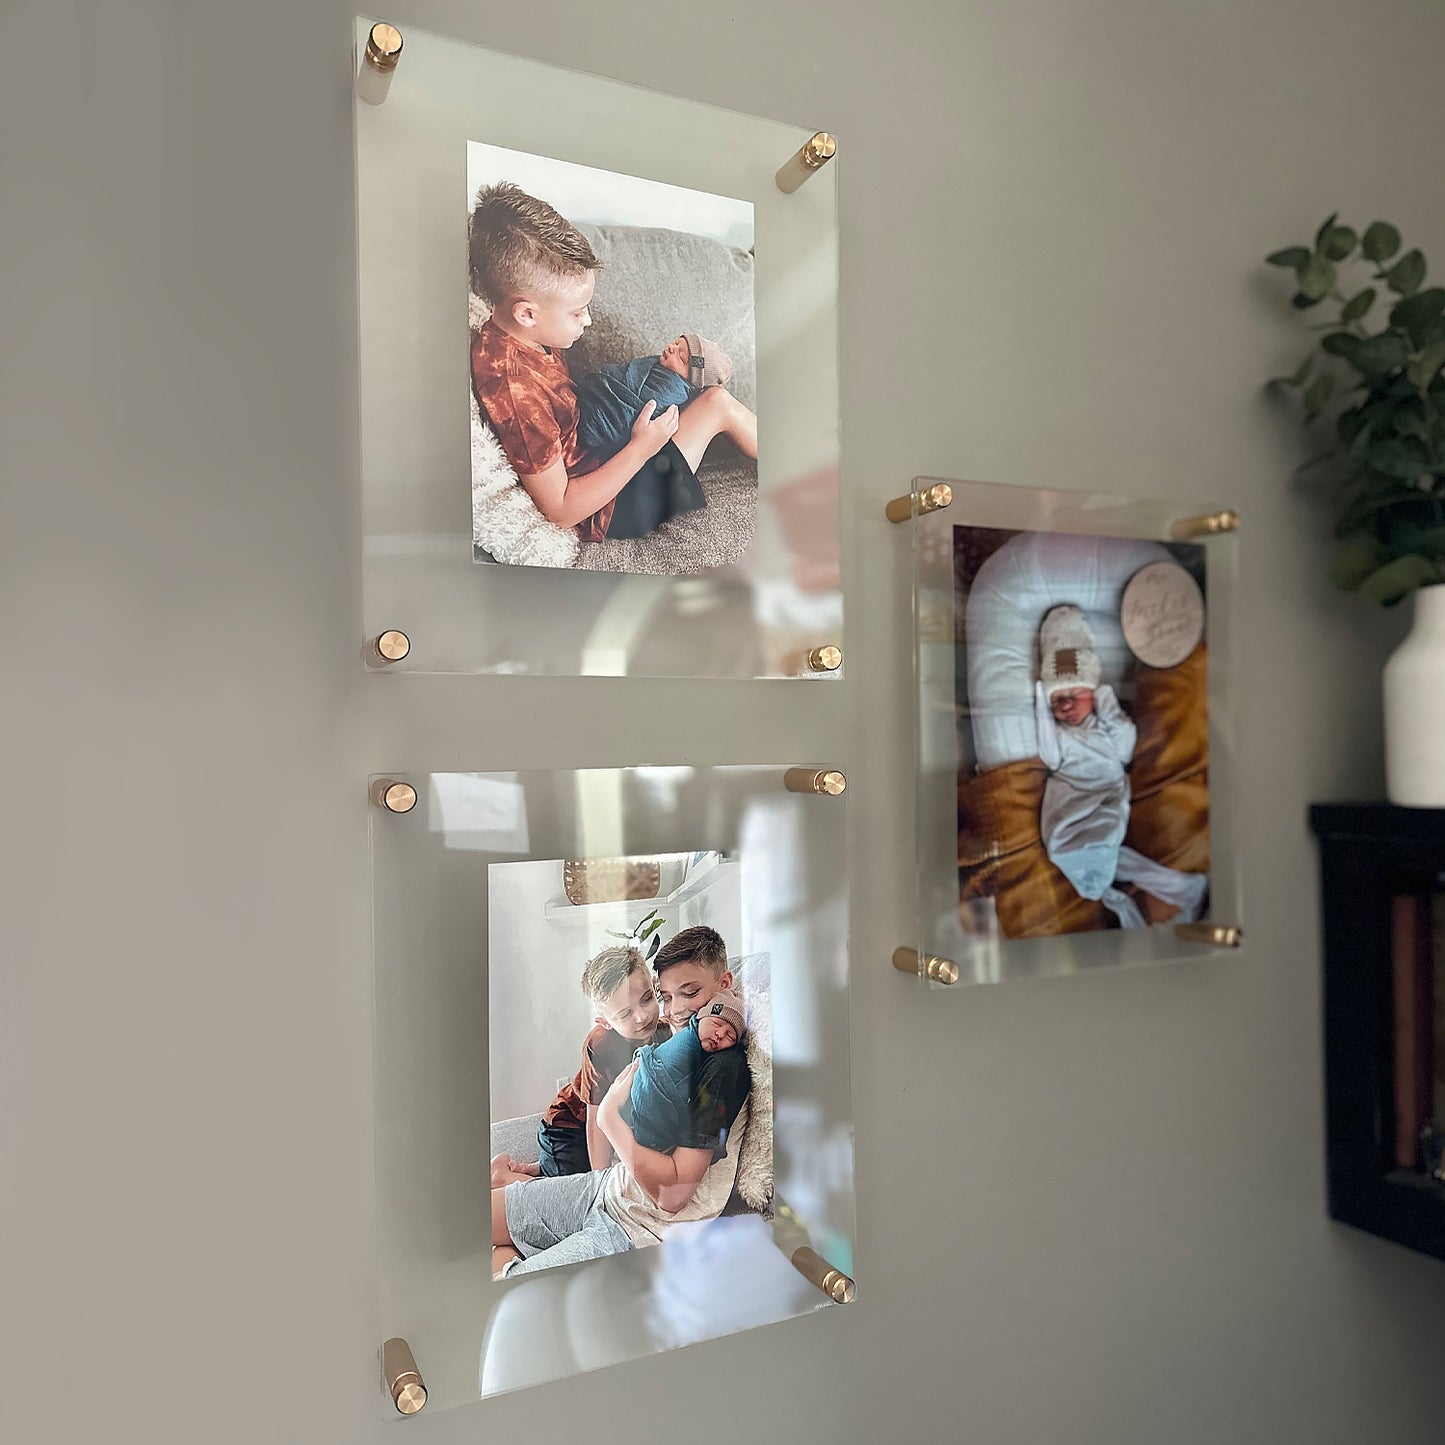 5x7" Photo Floating Acrylic Clear Picture Frame (Frame Size 10x12")